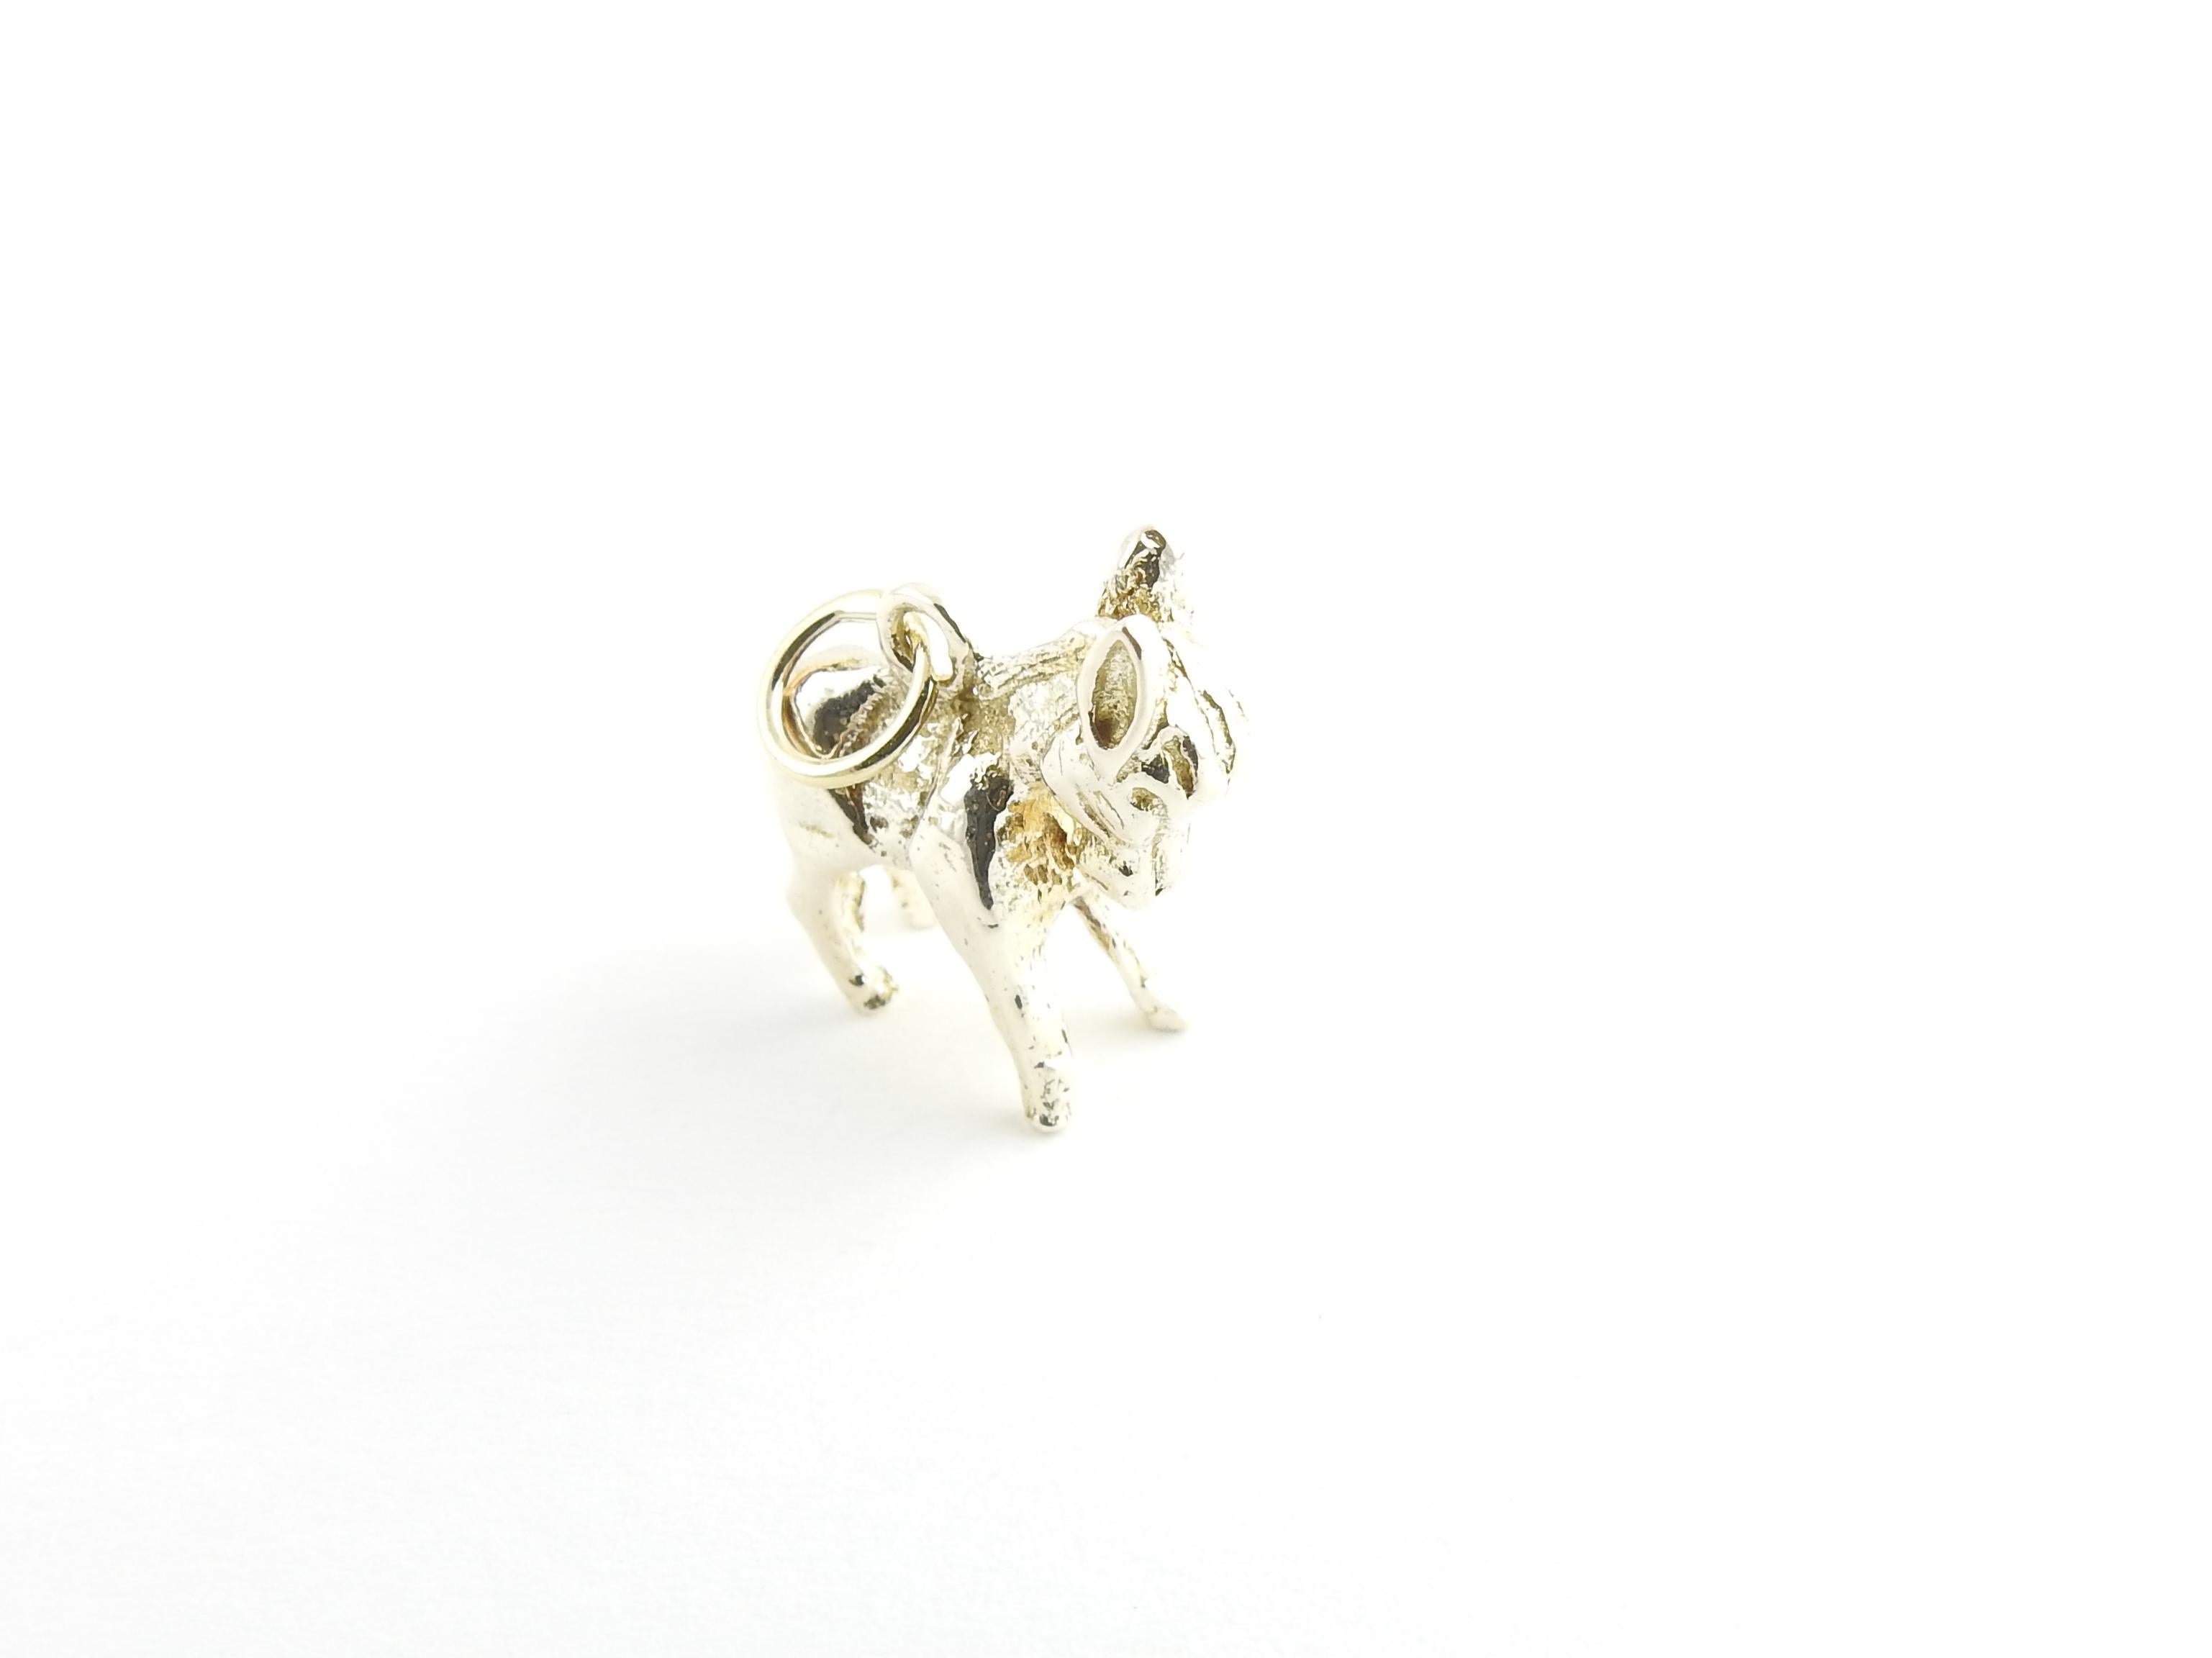 Vintage 6 Karat Yellow Gold Donkey Charm

This lovely 3D charm features an adorable donkey meticulously detailed in 6K yellow gold.

Size: 17 mm x 16 mm (actual charm)

Weight: 2.8 dwt. / 4.4 gr.

Acid tested for 6K gold.

Very good condition,